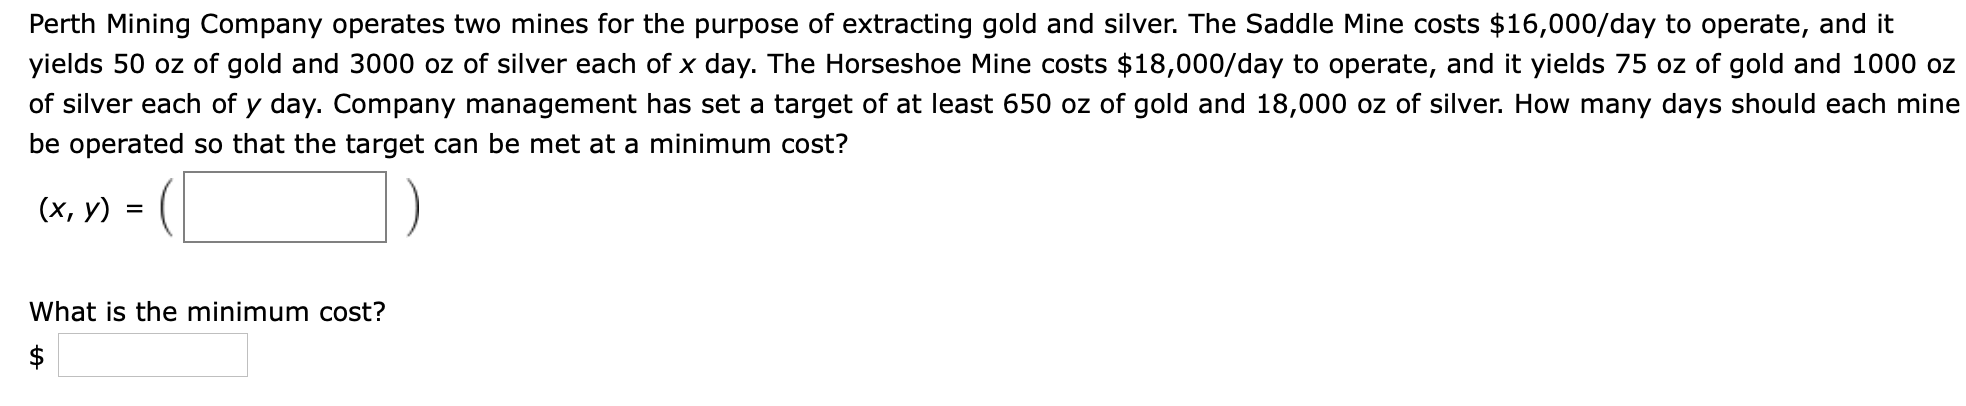 Perth Mining Company operates two mines for the purpose of extracting gold and silver. The Saddle Mine costs $16,000/day to operate, and it
yields 50 oz of gold and 3000 oz of silver each of x day. The Horseshoe Mine costs $18,000/day to operate, and it yields 75 oz of gold and 1000 oz
of silver each of y day. Company management has set a target of at least 650 oz of gold and 18,000 oz of silver. How many days should each mine
be operated so that the target can be met at a minimum cost?
(х, у)
What is the minimum cost?
$
